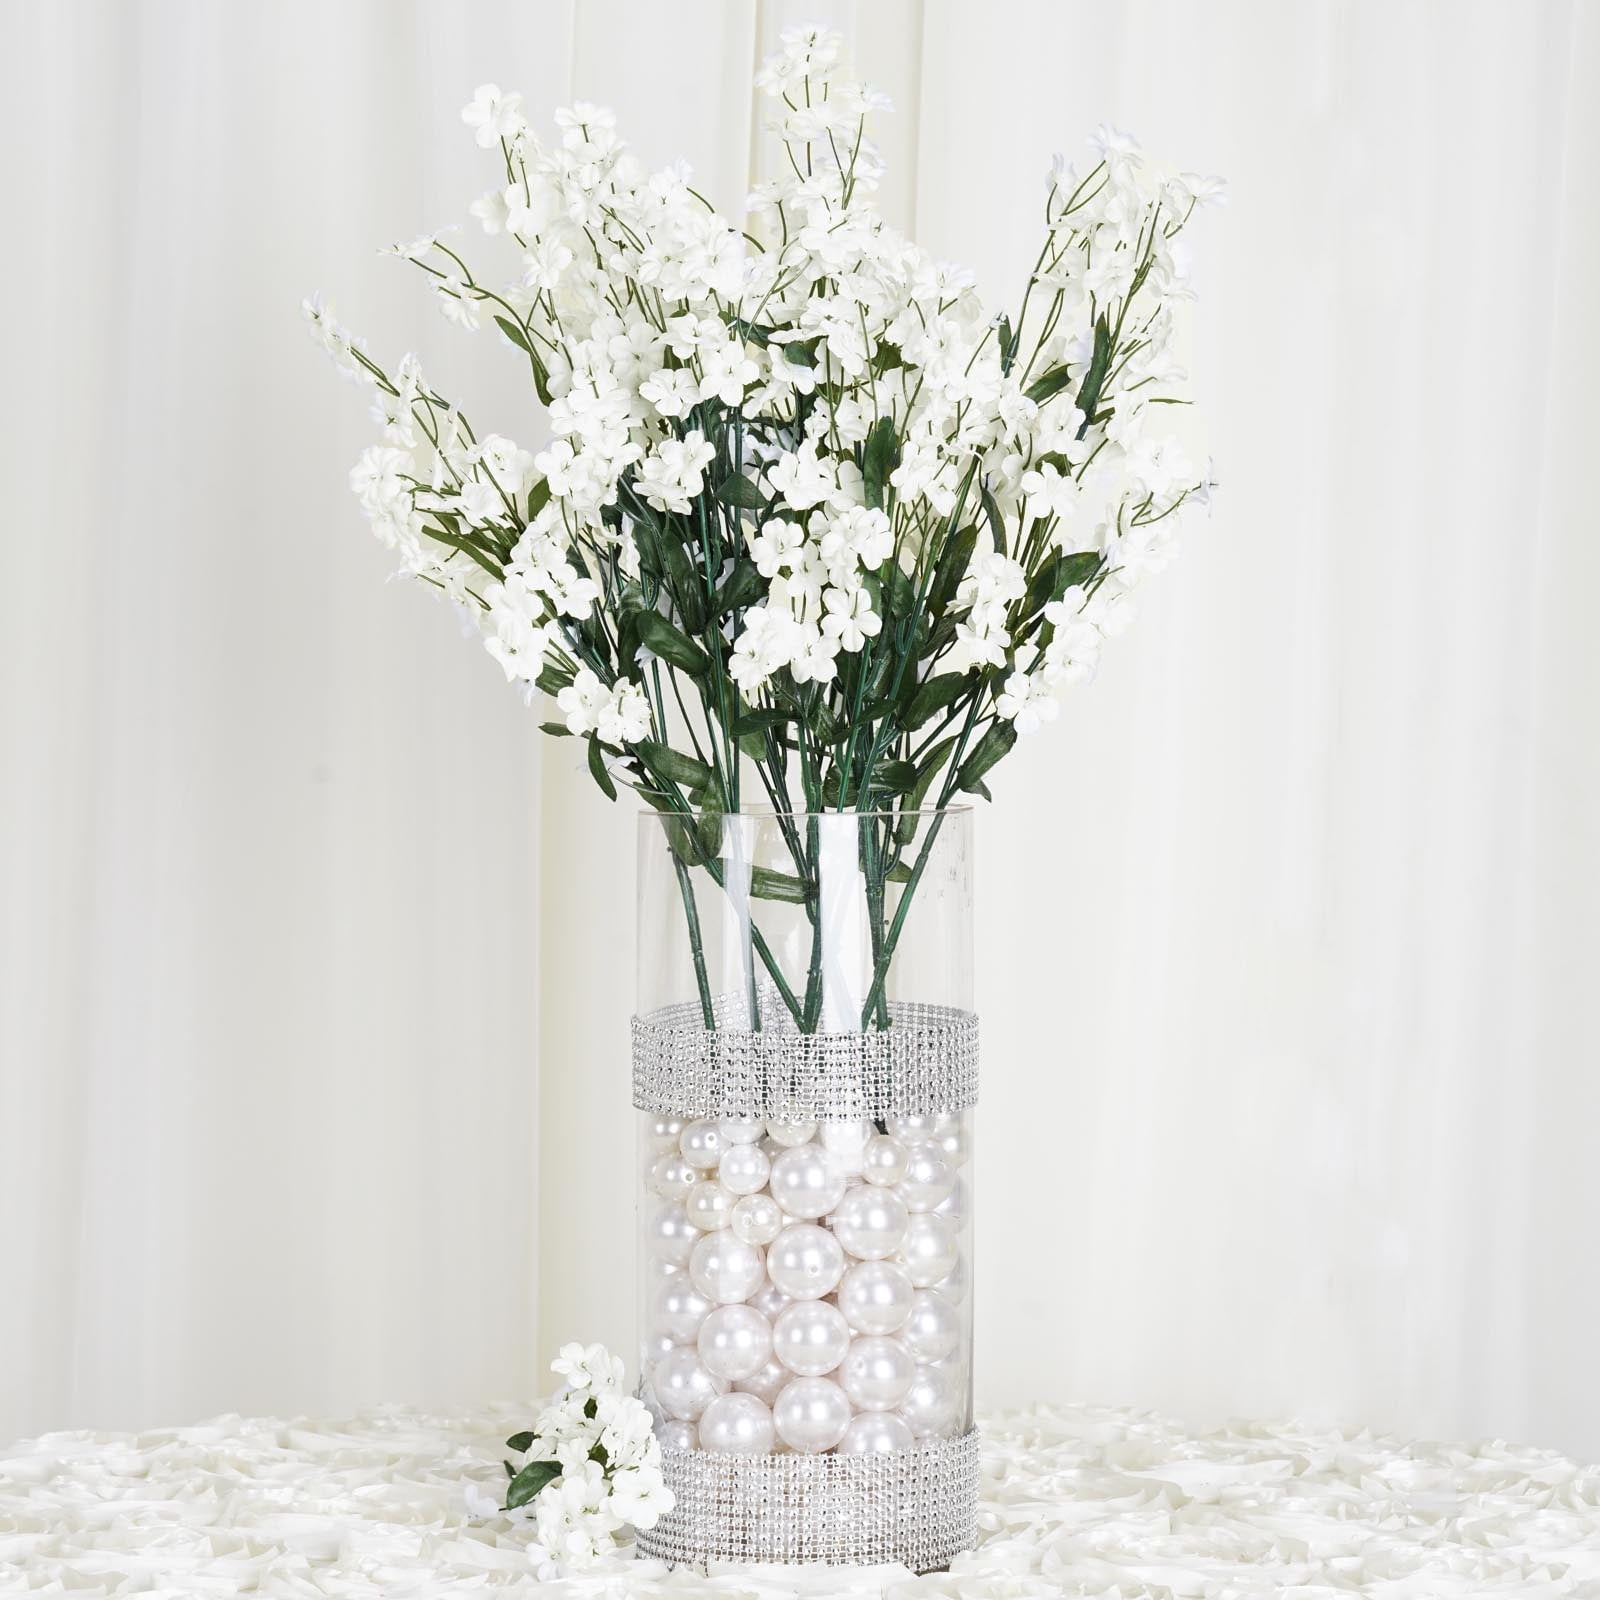 Spirit Up Art Baby Breath Flowers 13 Artificial Bulk White 27Pcs Long  Stems for Wreath Wedding DIY Home Garden Party Table Decoration (9 Bunches)